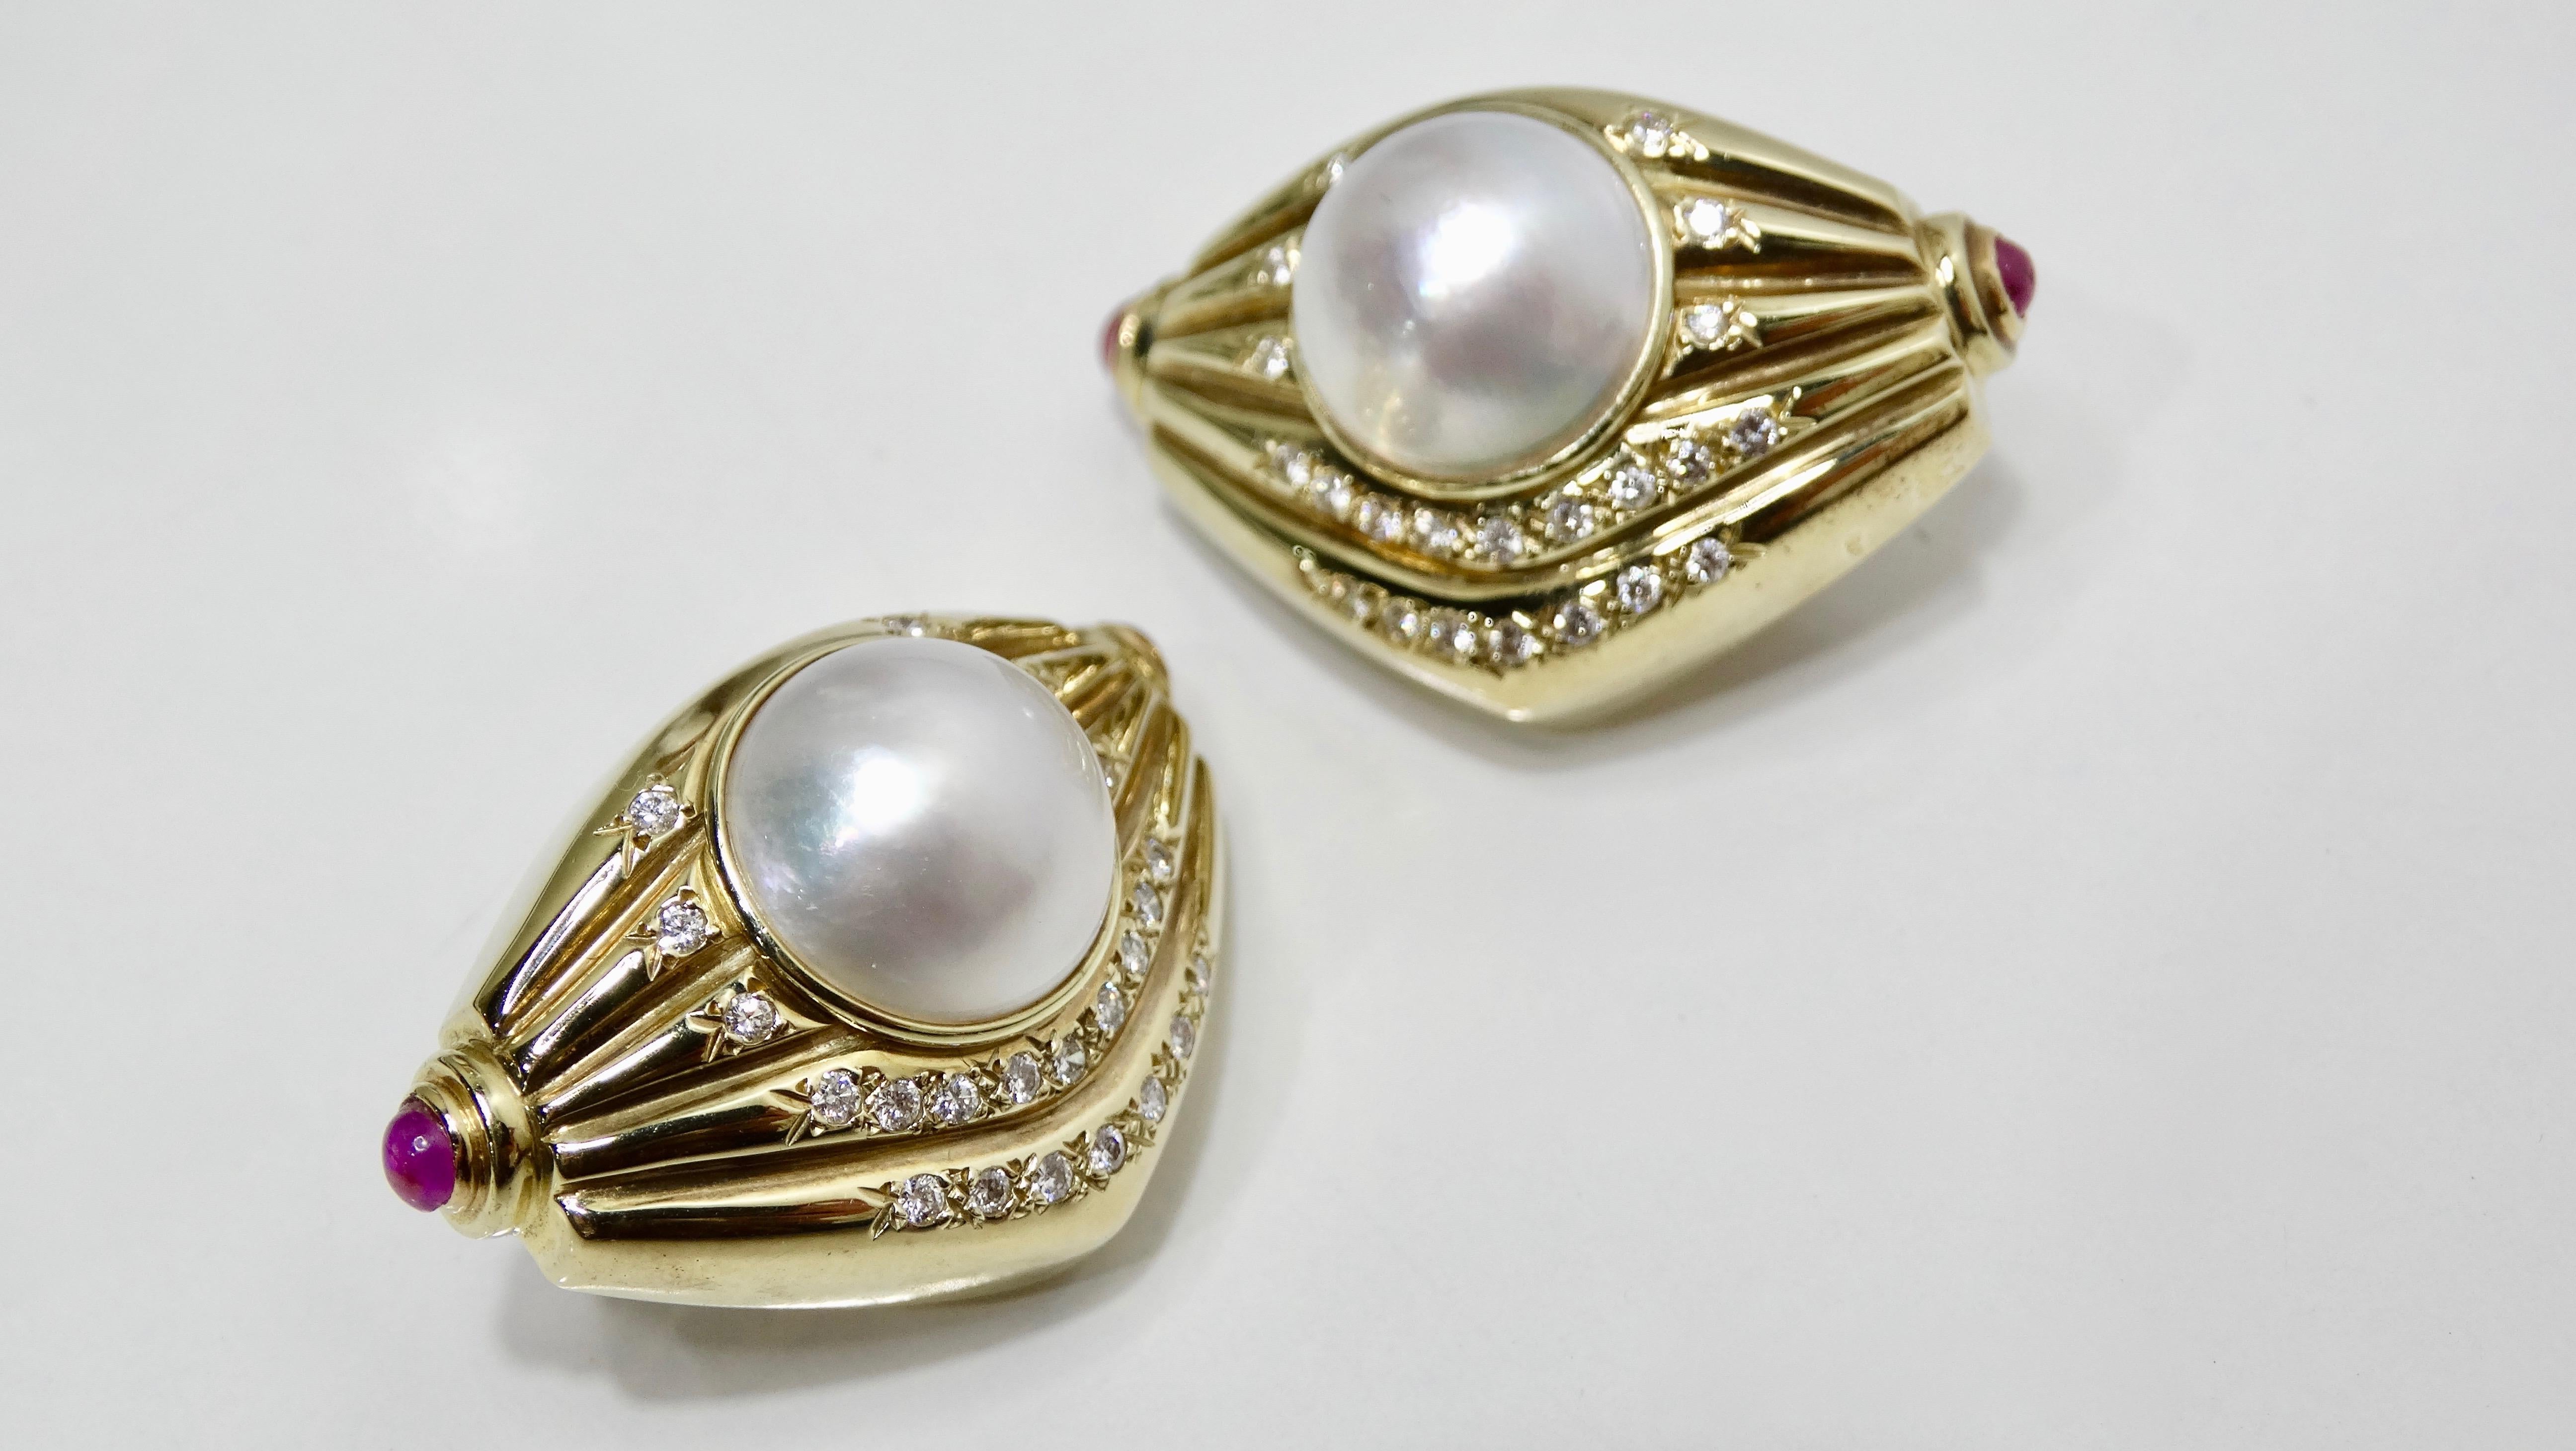 Complete your look with these stunning earrings! Circa 1970s, these ribbed geometric shaped earrings are 14k Gold and set with a large natural Pearl. Features Cabochon cut Pink Sapphires are on both ends, five rows of round brilliant cut Pave set